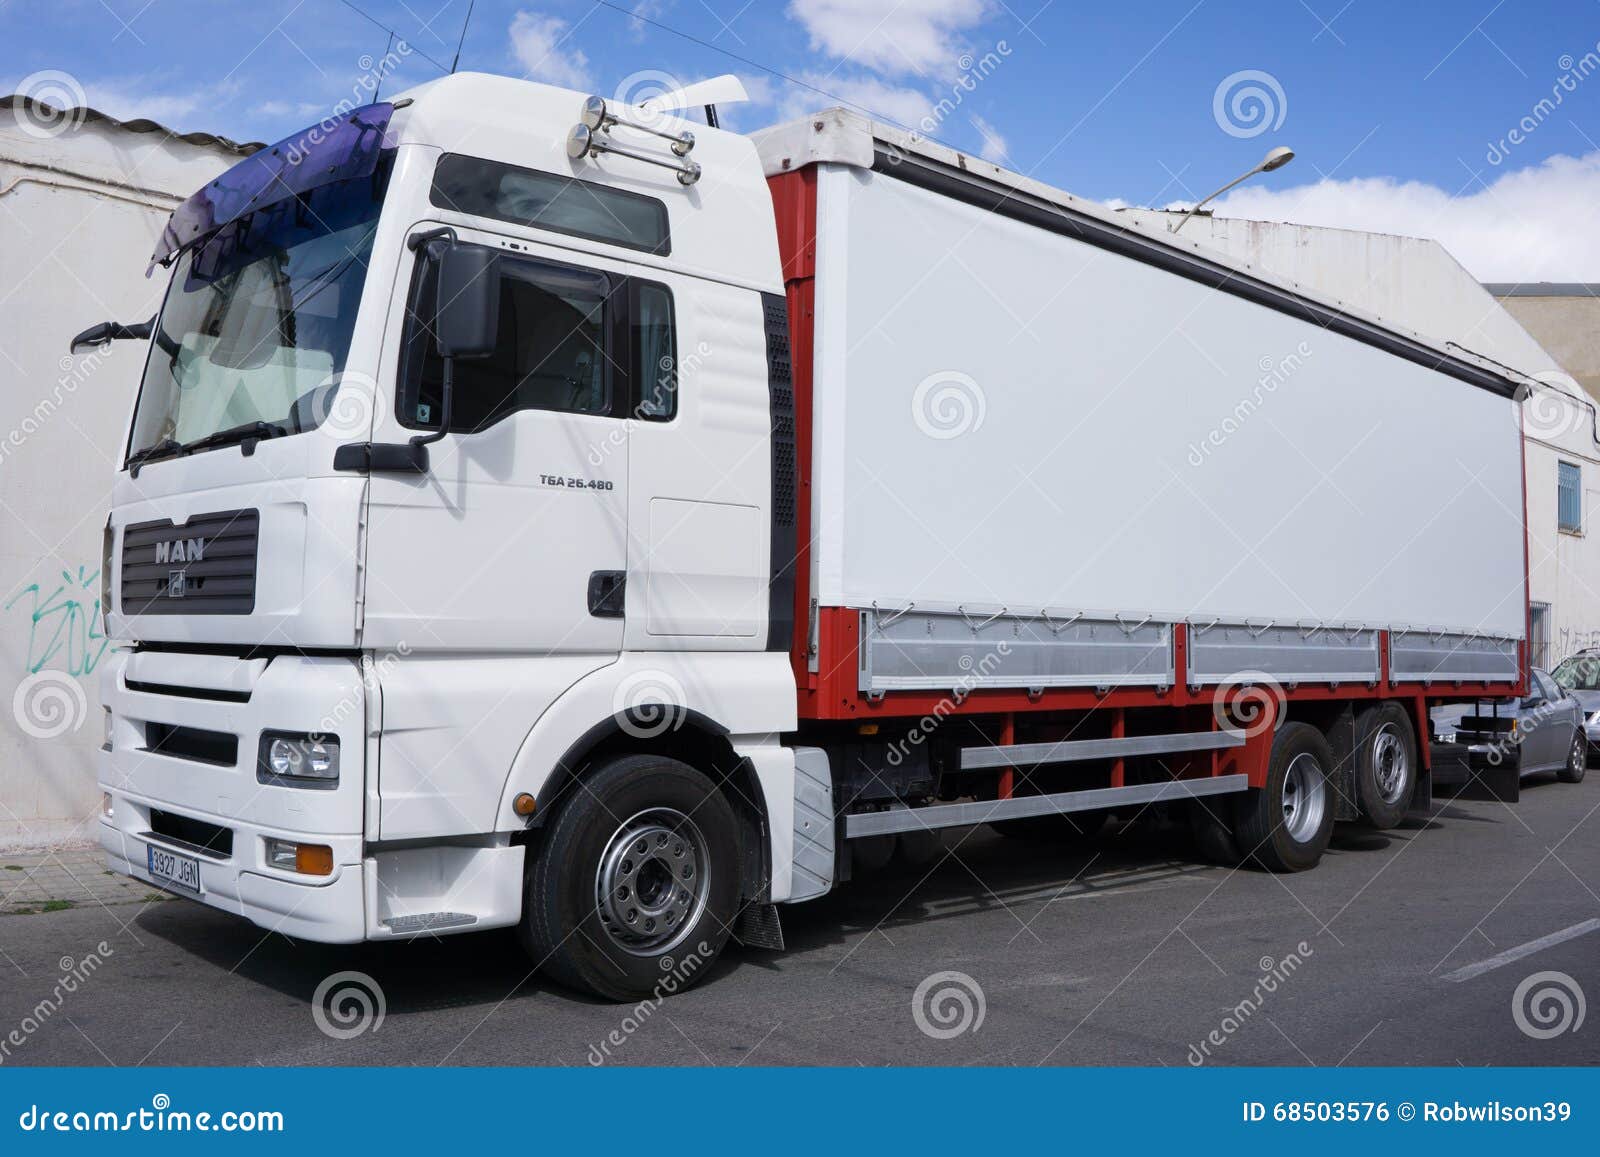 A White MAN Truck editorial photo. Image of industry - 68503576